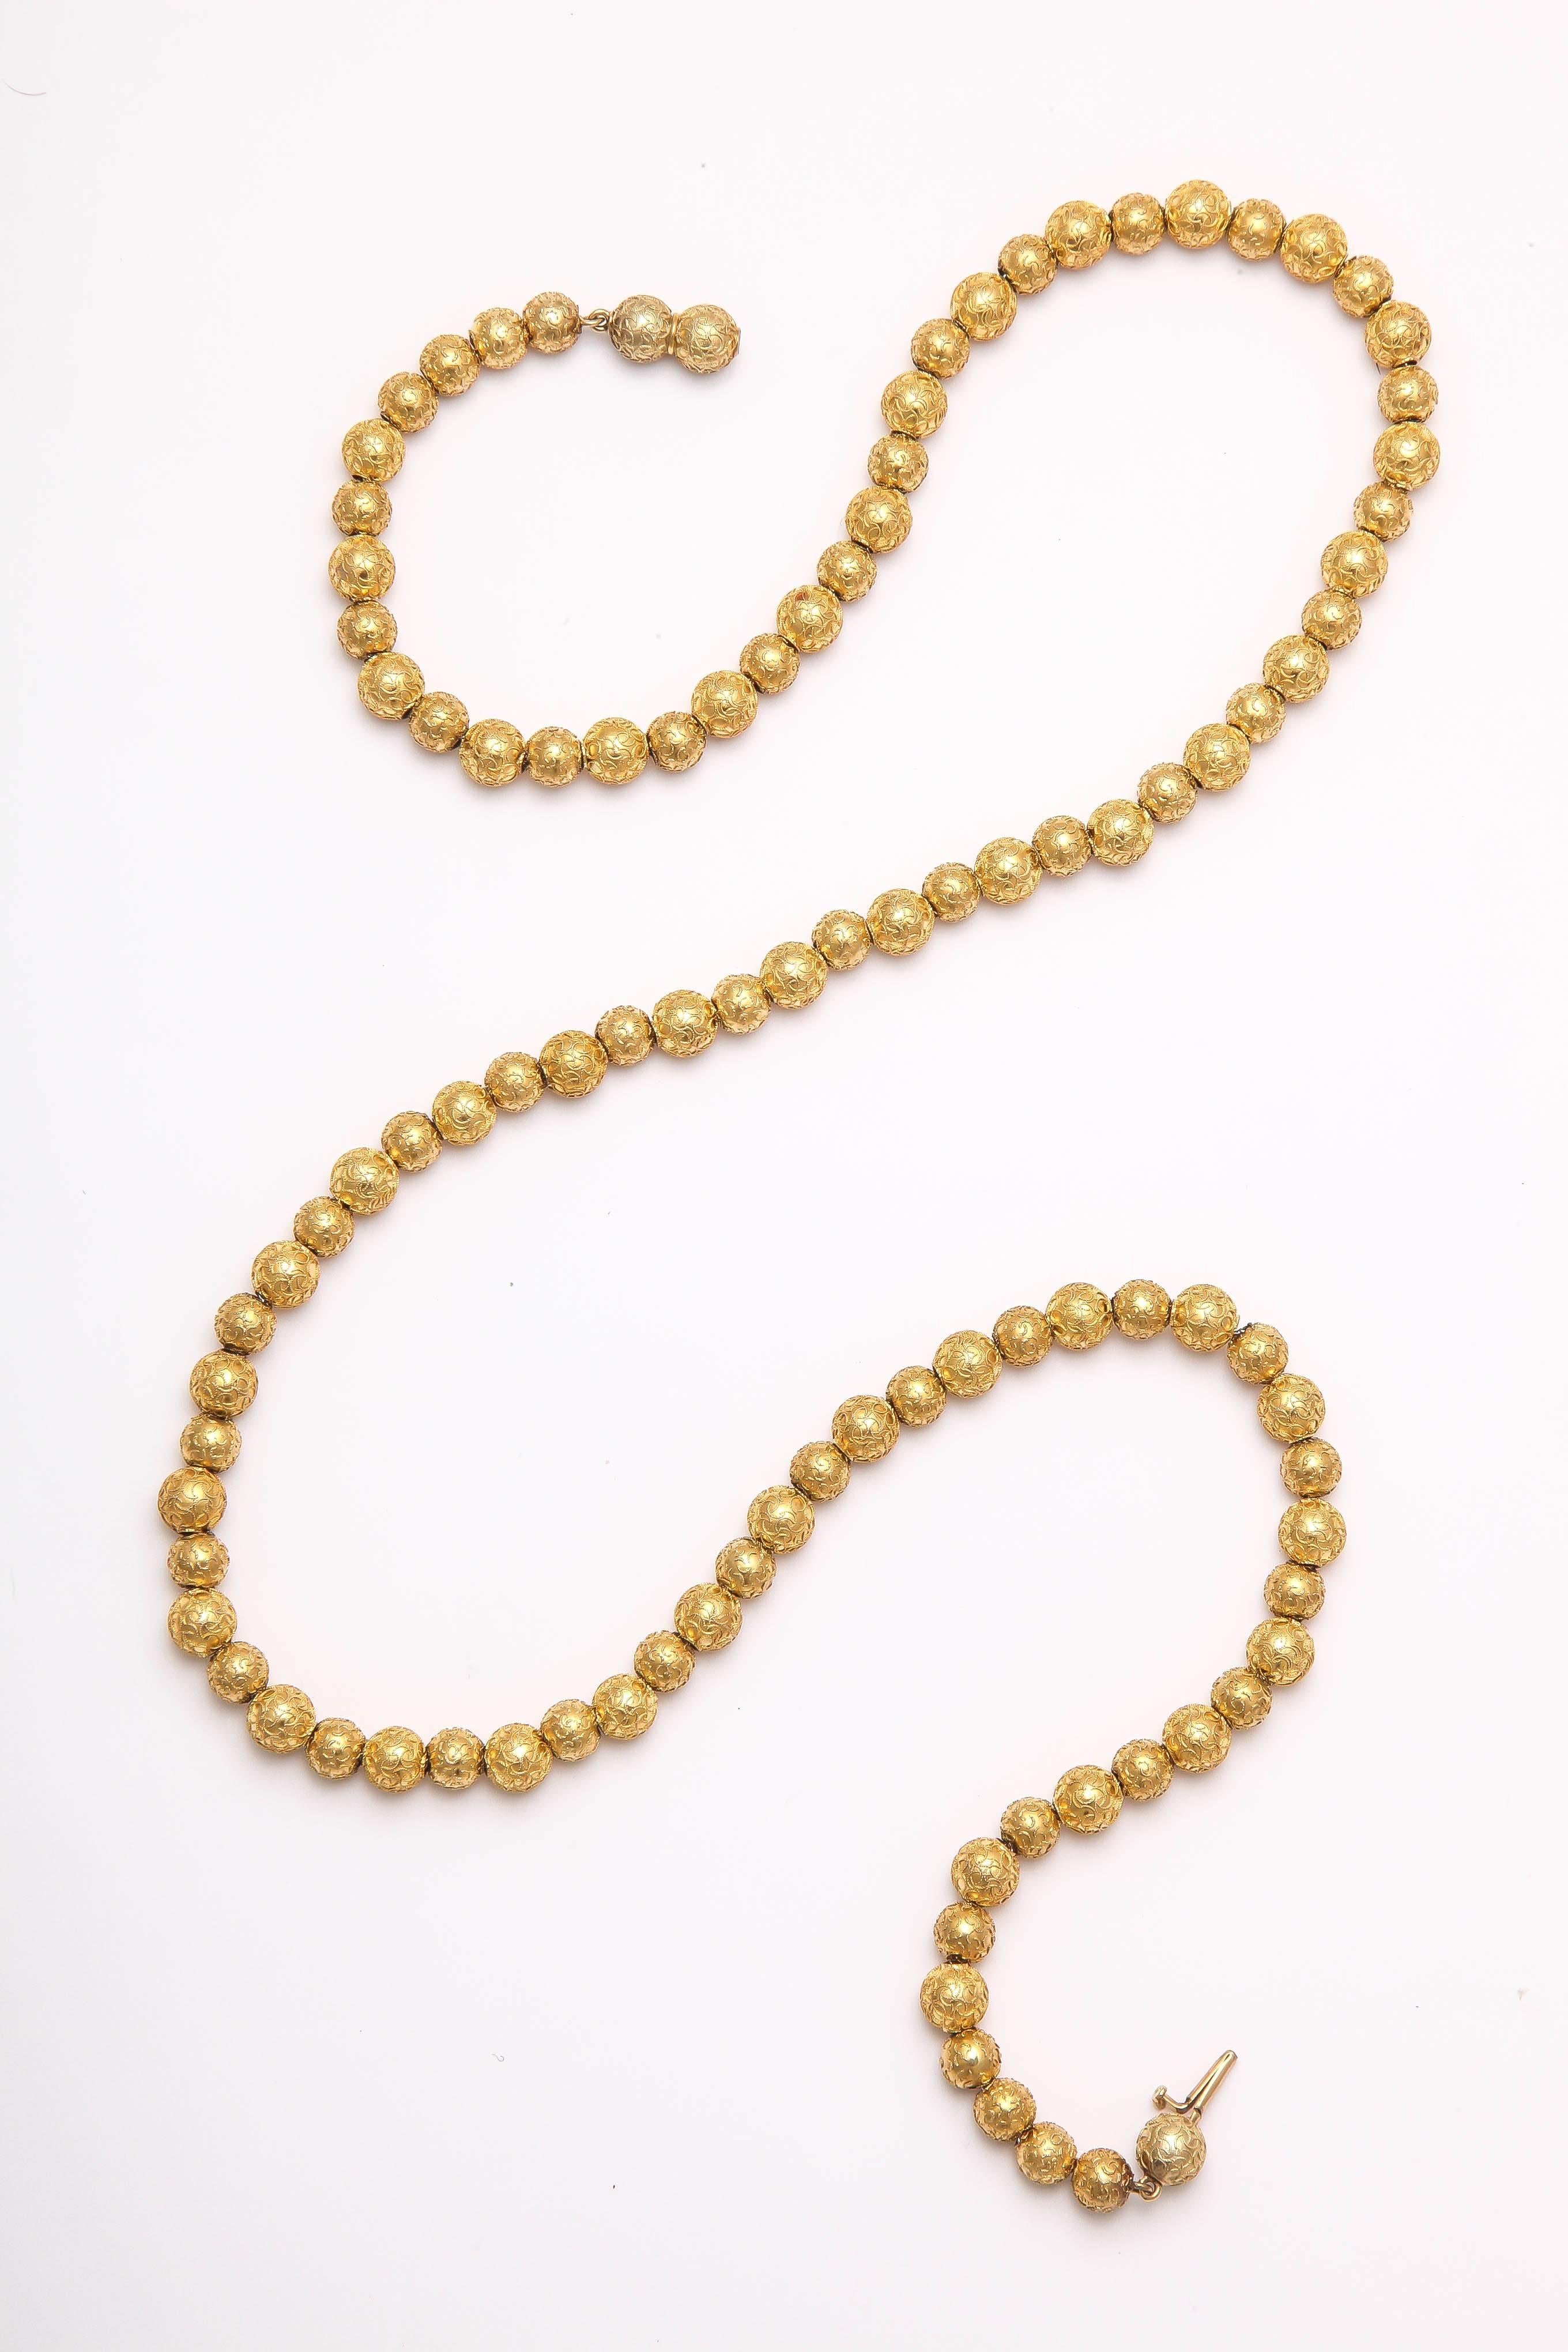 Generous engraving completely covers a long strand of 15 ct gold beads from the Victorian era c. 1870. The strand is strung on silver wire and is an example of  Victorian daytime jewelry as  seen in many portraits of the era. Beautiful in their